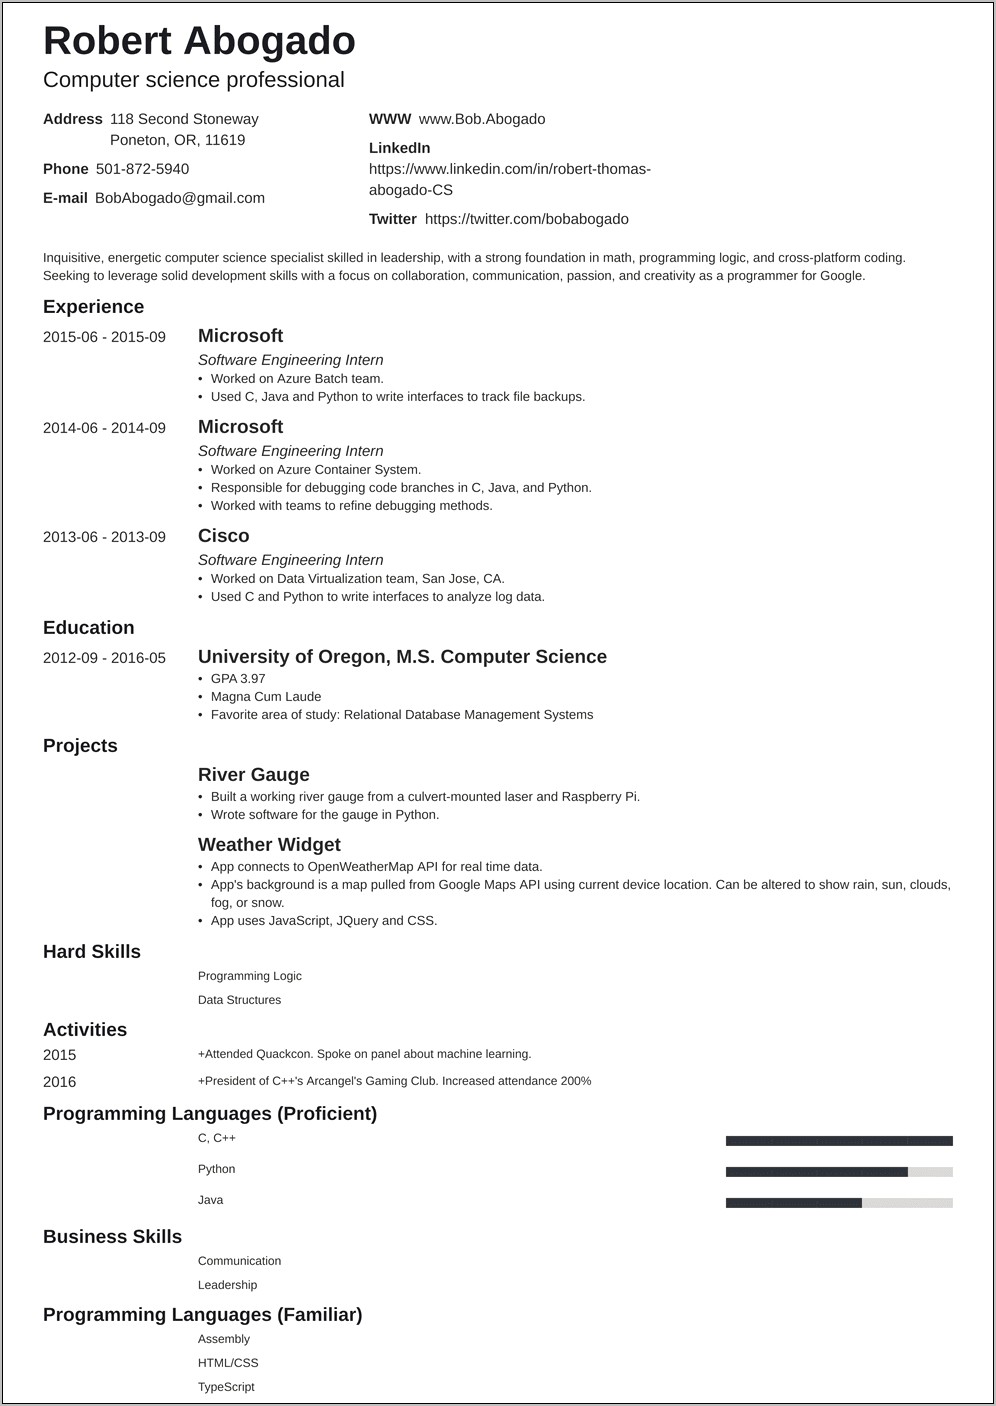 Resume Objective Statements For Computer Science